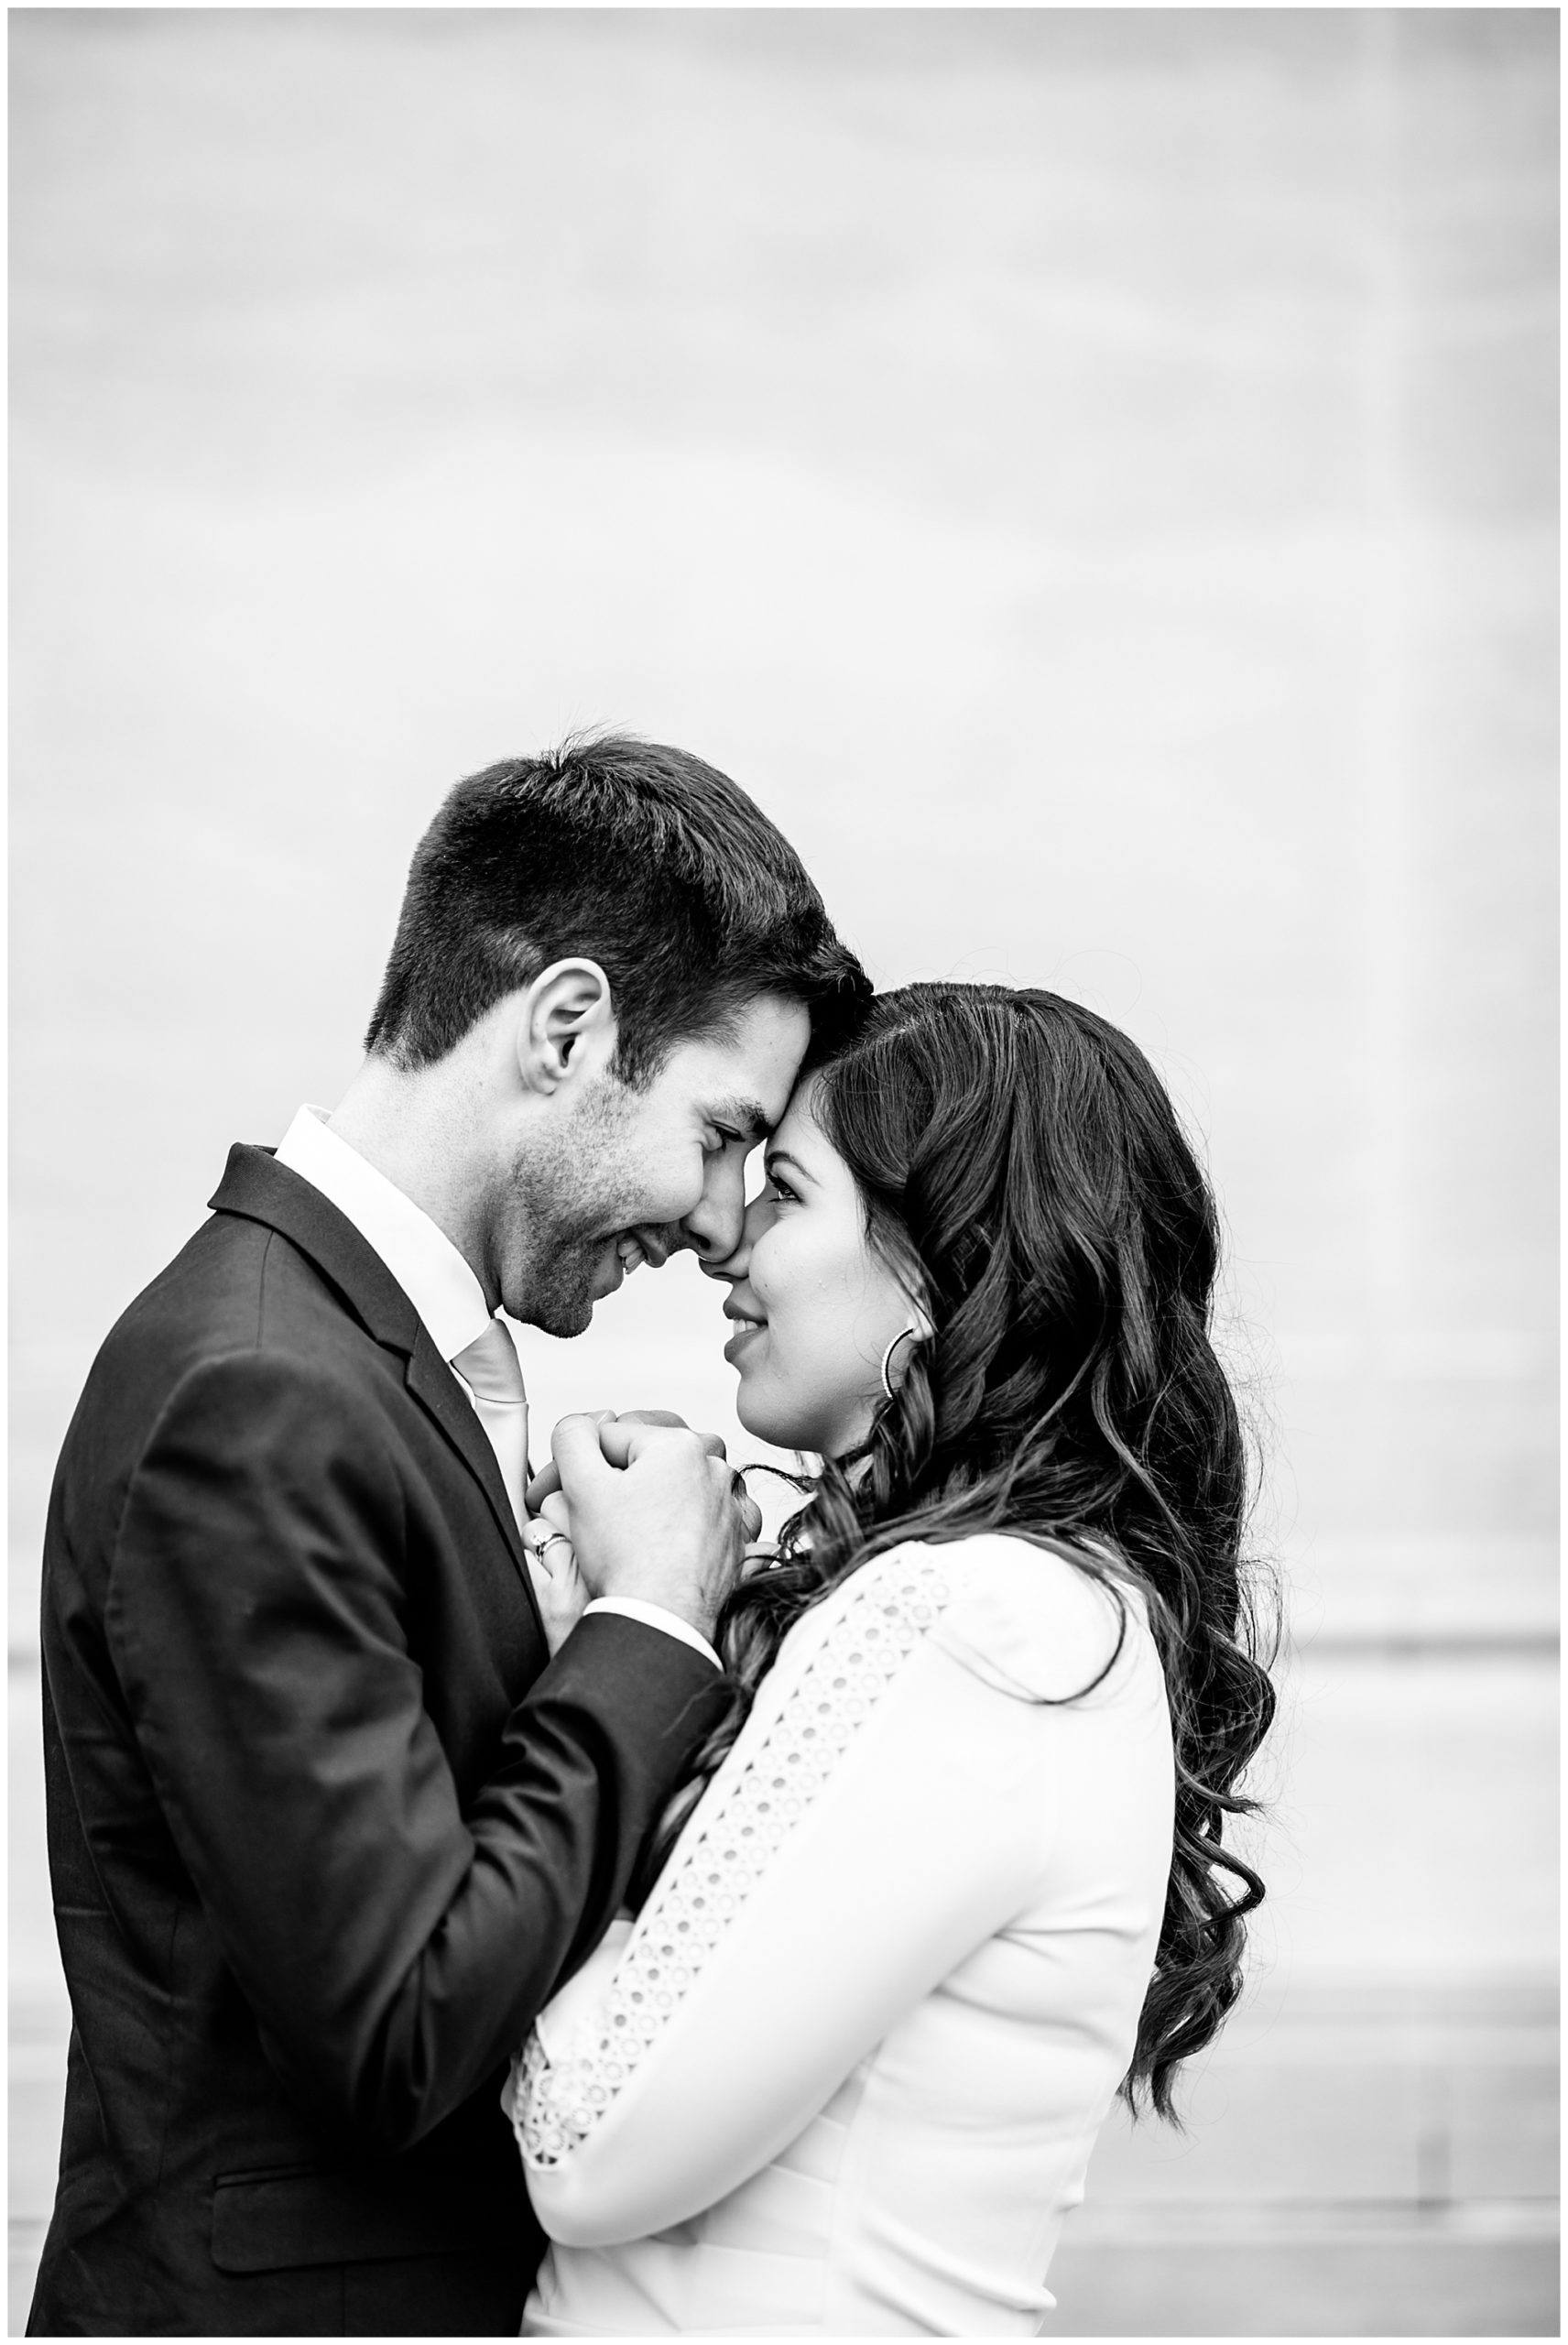 black and white photos, Washington DC photographer, black and white photography, black and white photographer, classic black and white, behind the scenes photography, photography tips, black and white photography tips, Rachel E.H. Photography, couple holding hands at their chests